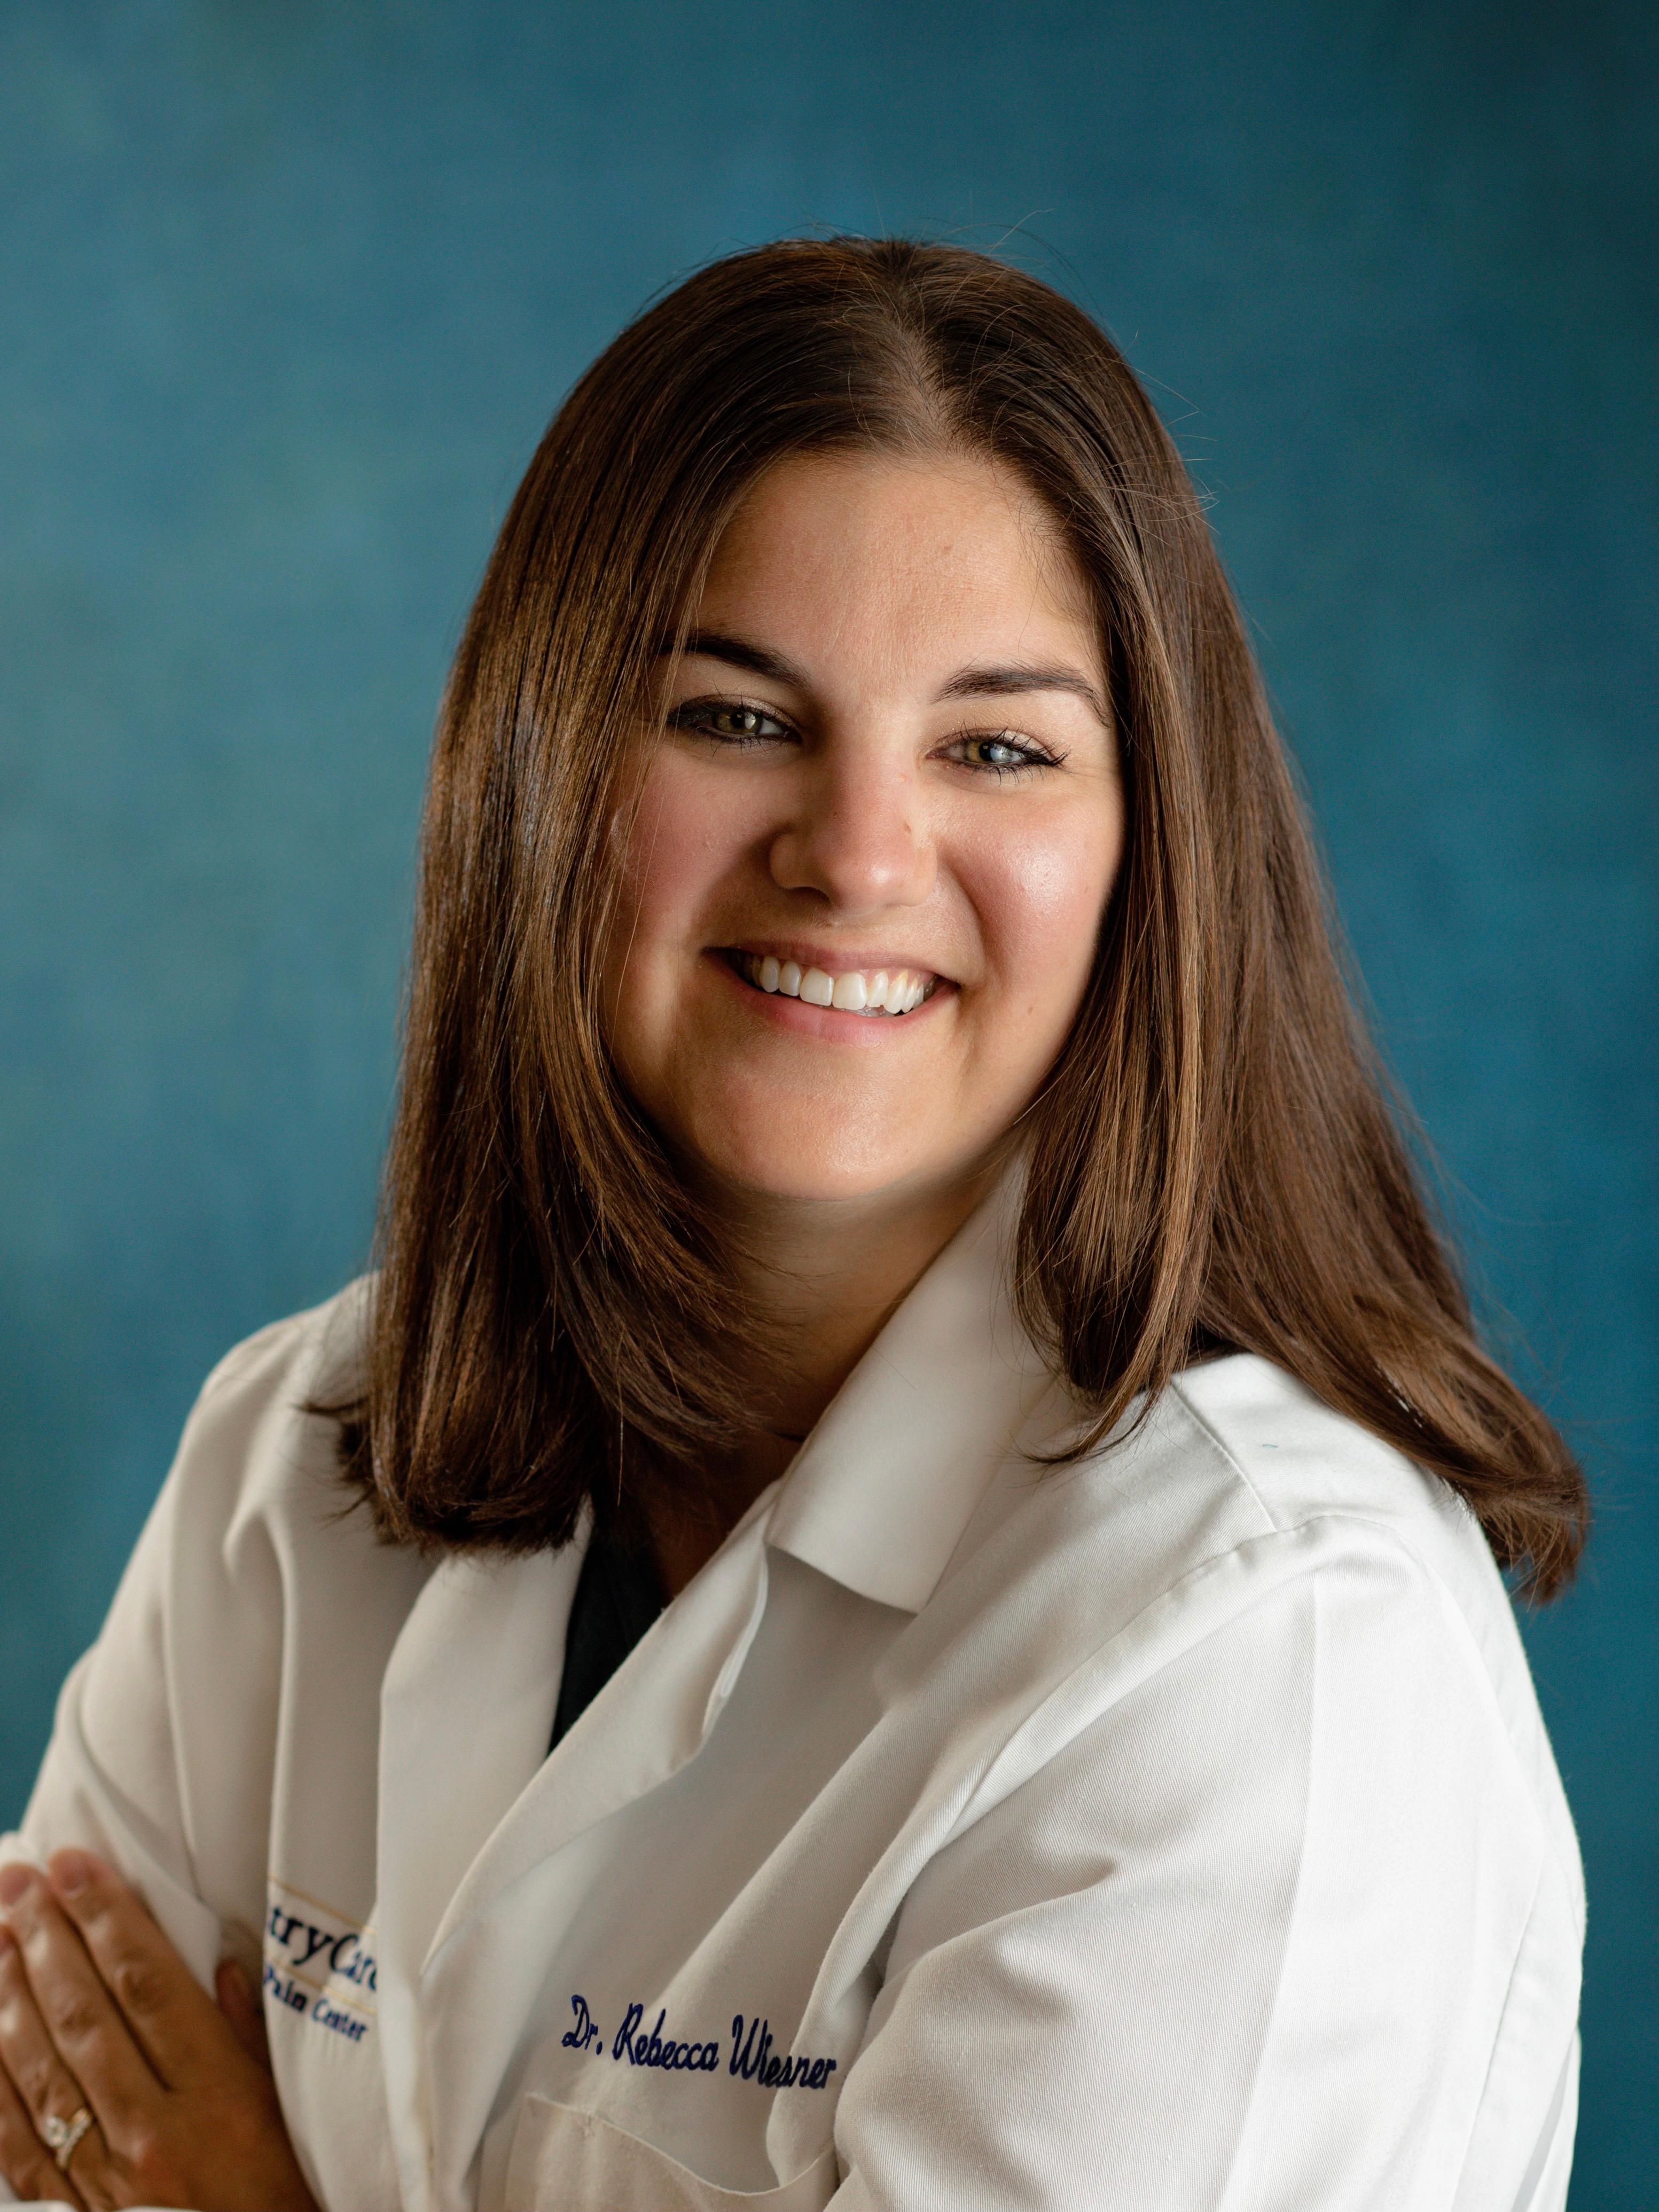 Rebecca Wiesner, DPM PodiatryCare, PC and the Heel Pain Center Enfield (860)741-3041